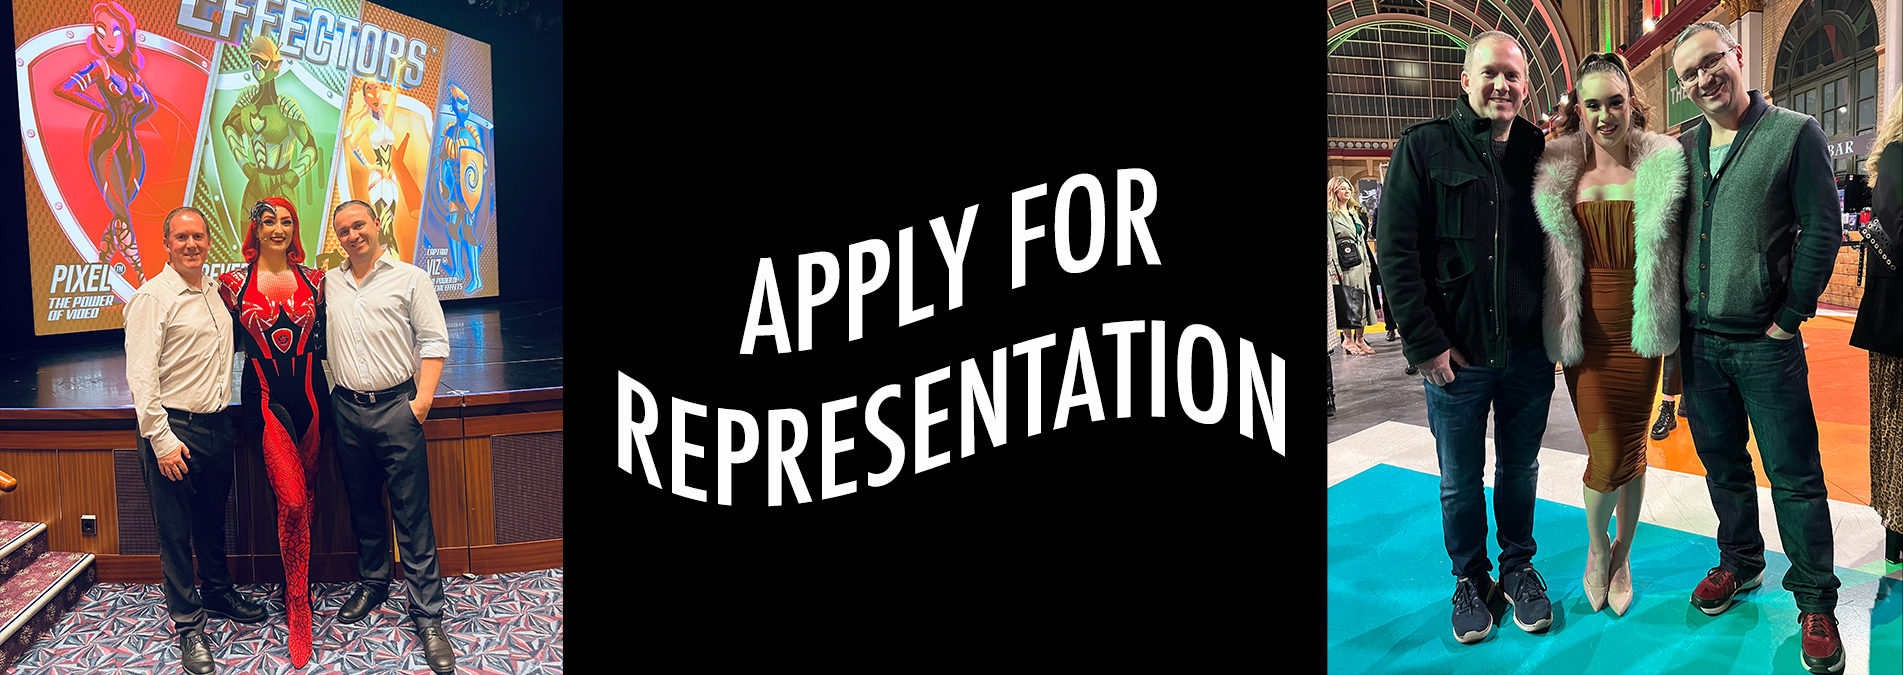 Apply for Rep